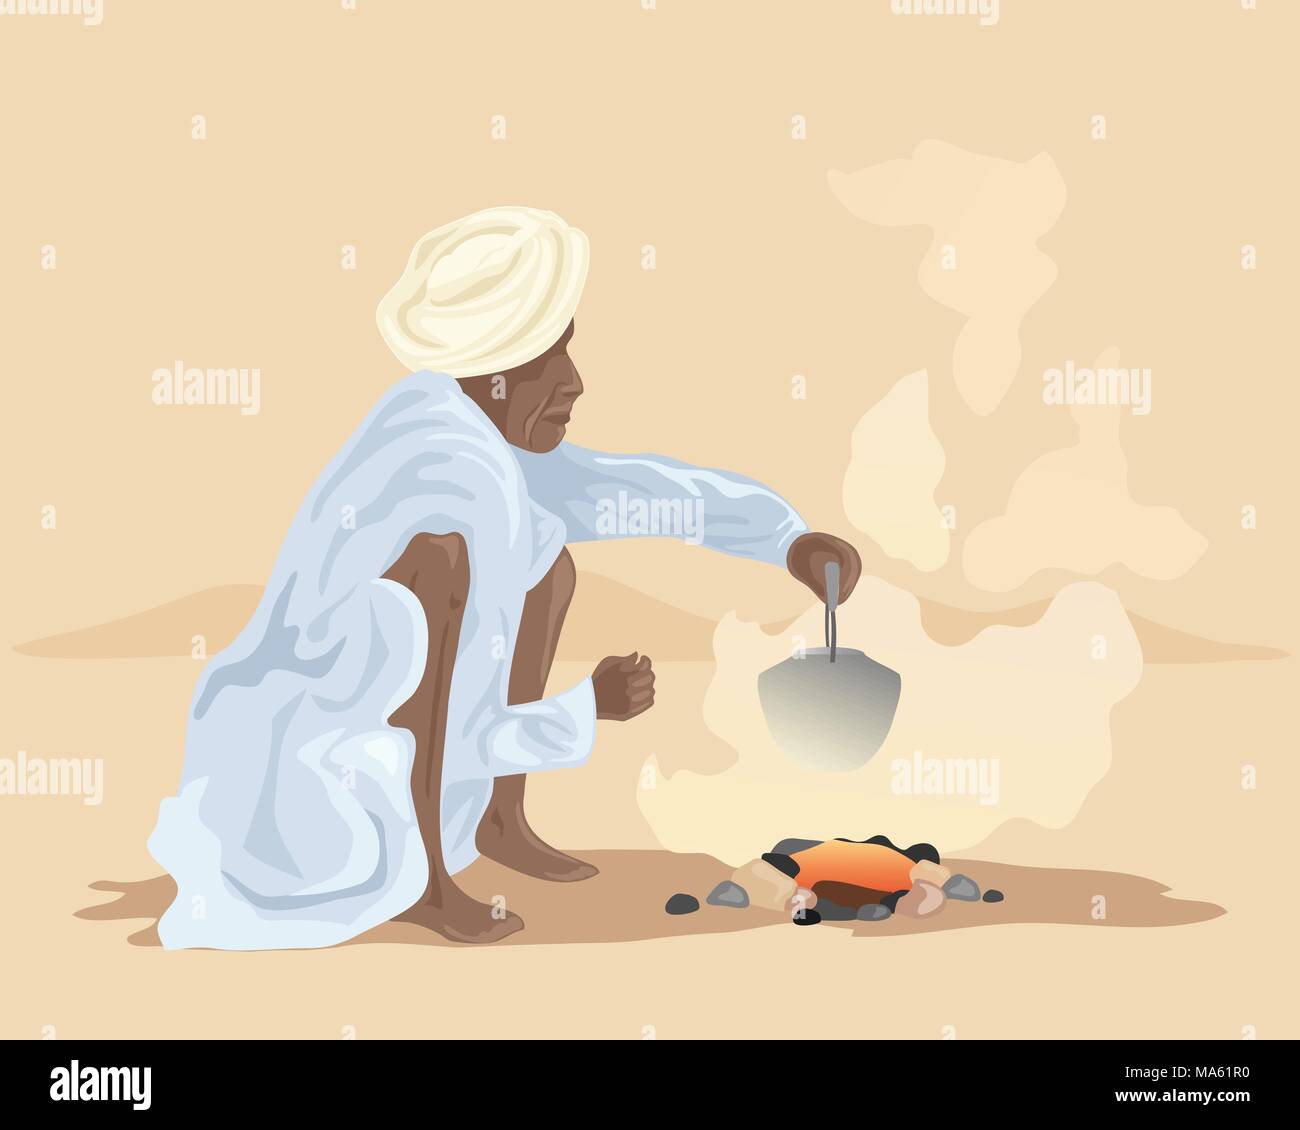 a vector illustration in eps 10 format of an Indian man making chai over a fire outside in a desert landscape Stock Vector